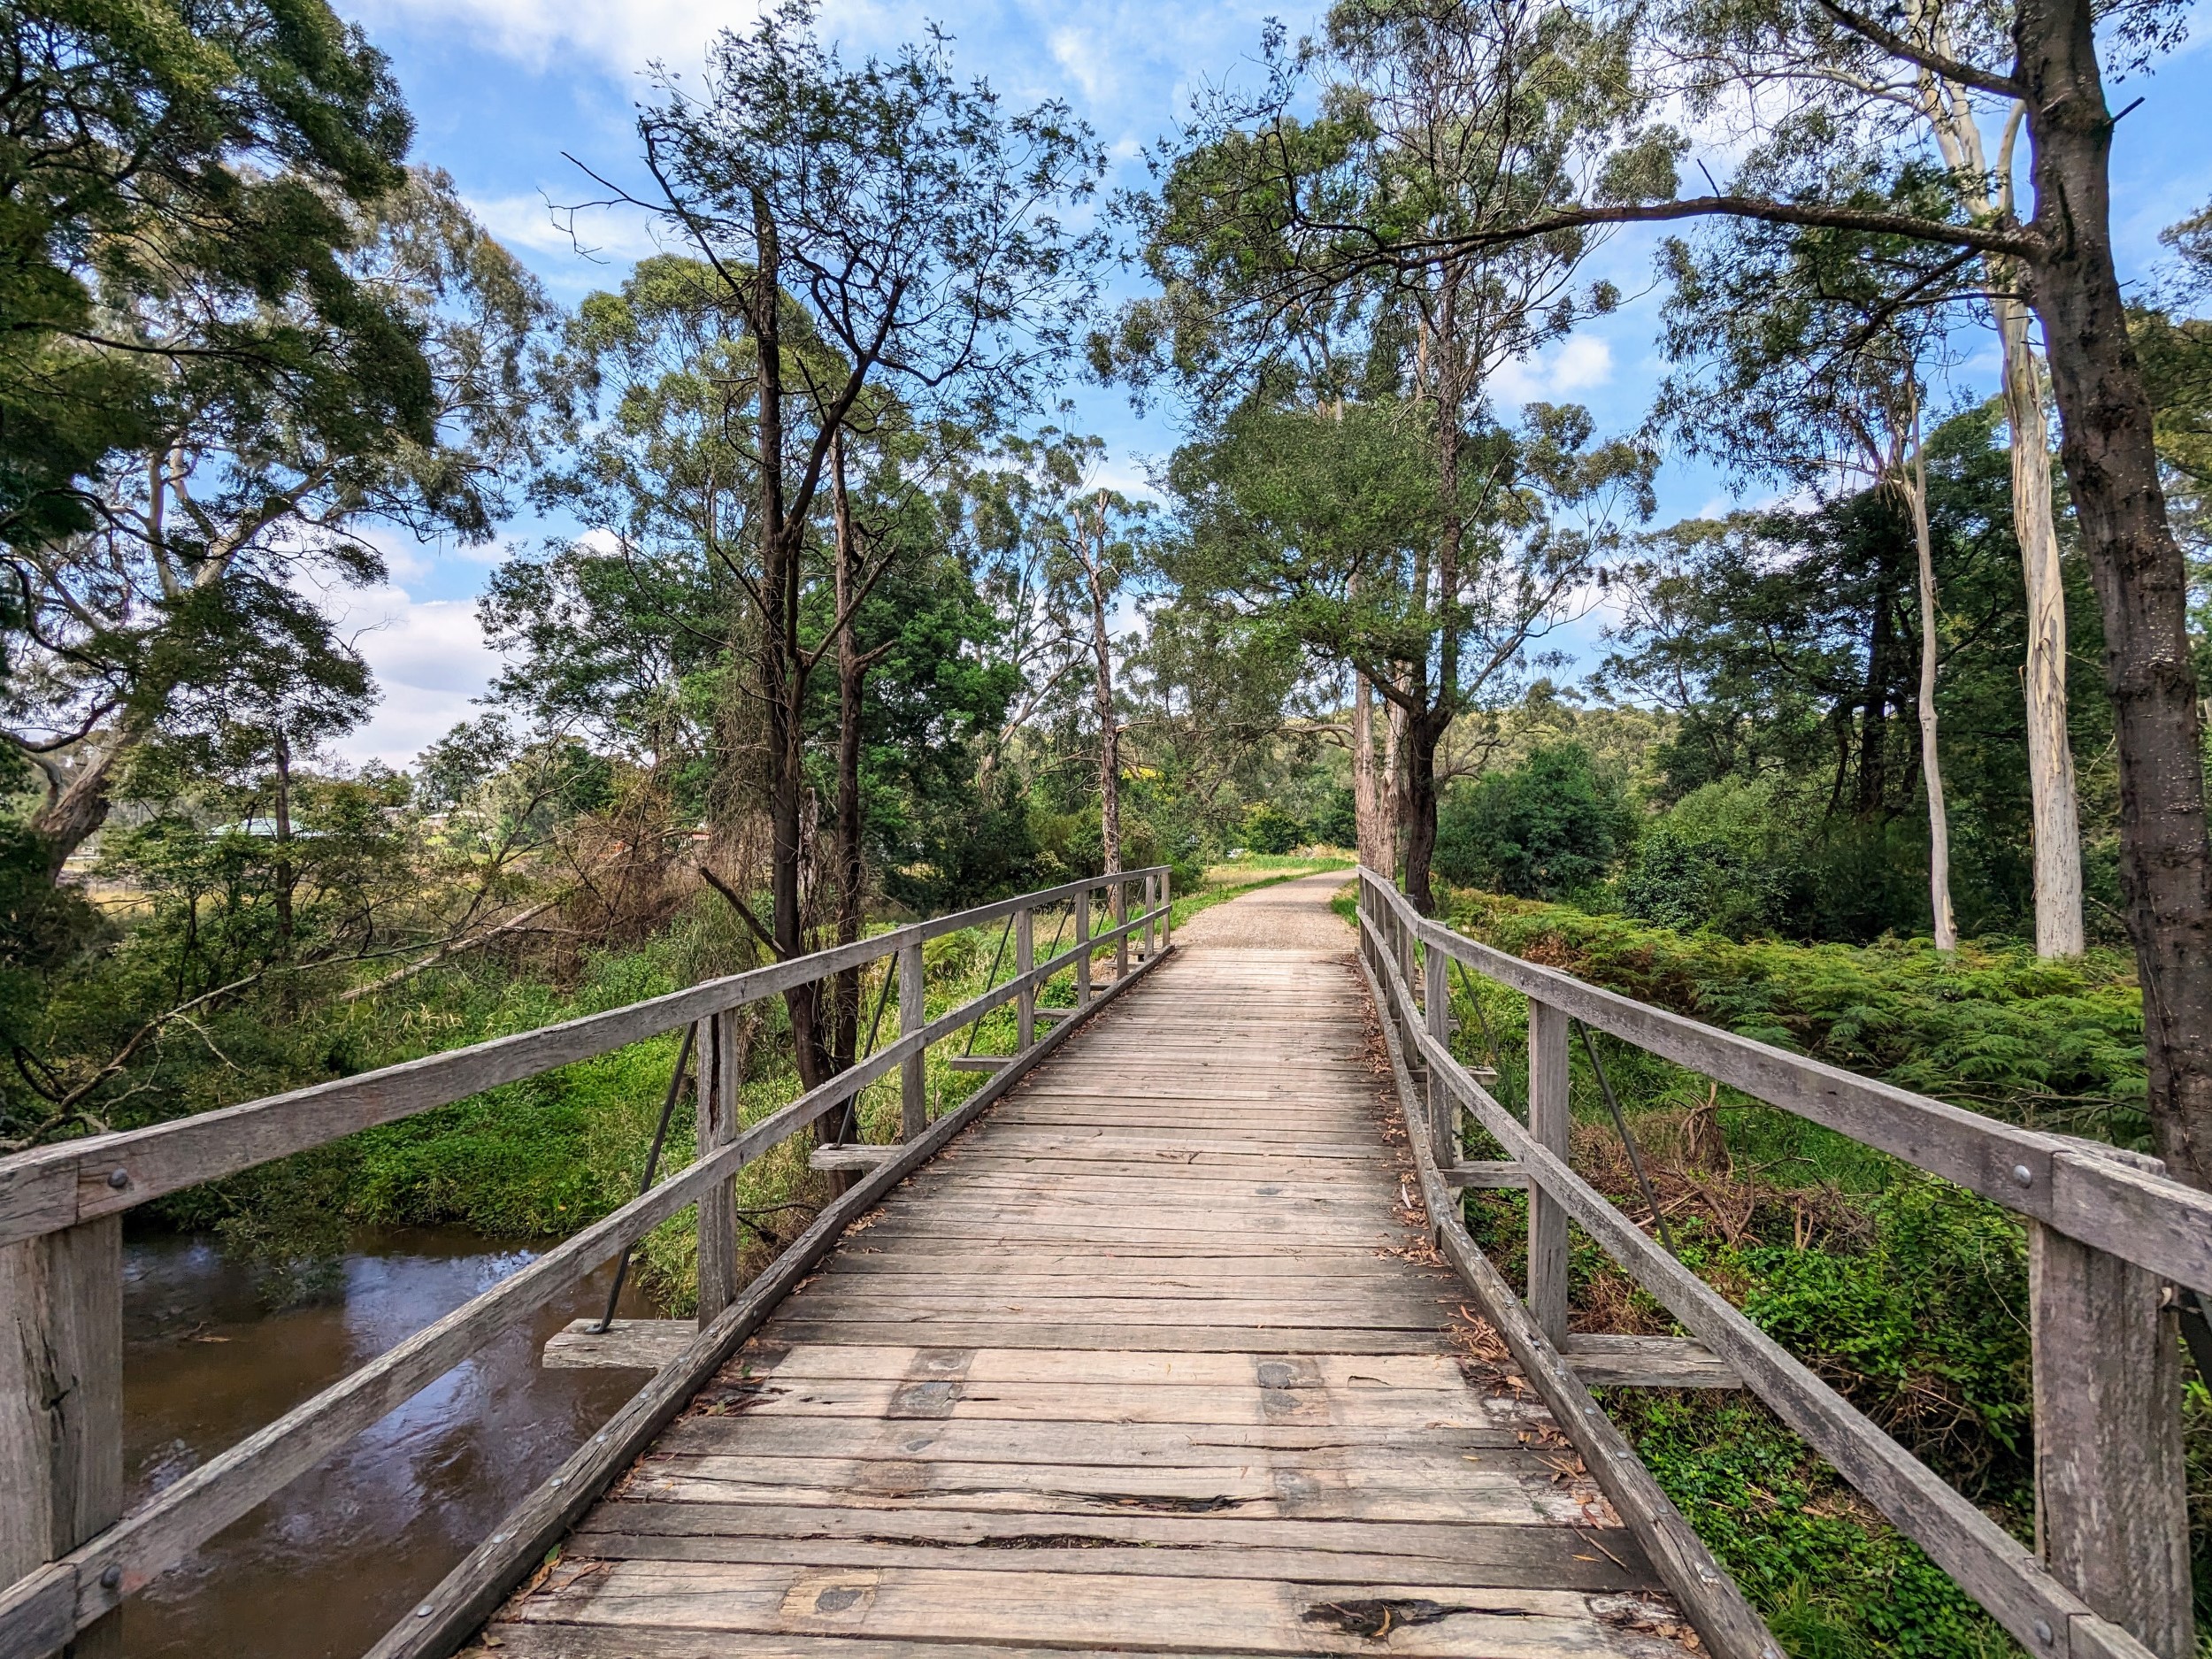 Wooden bridge over a small brown river with bushes and trees on both sides.